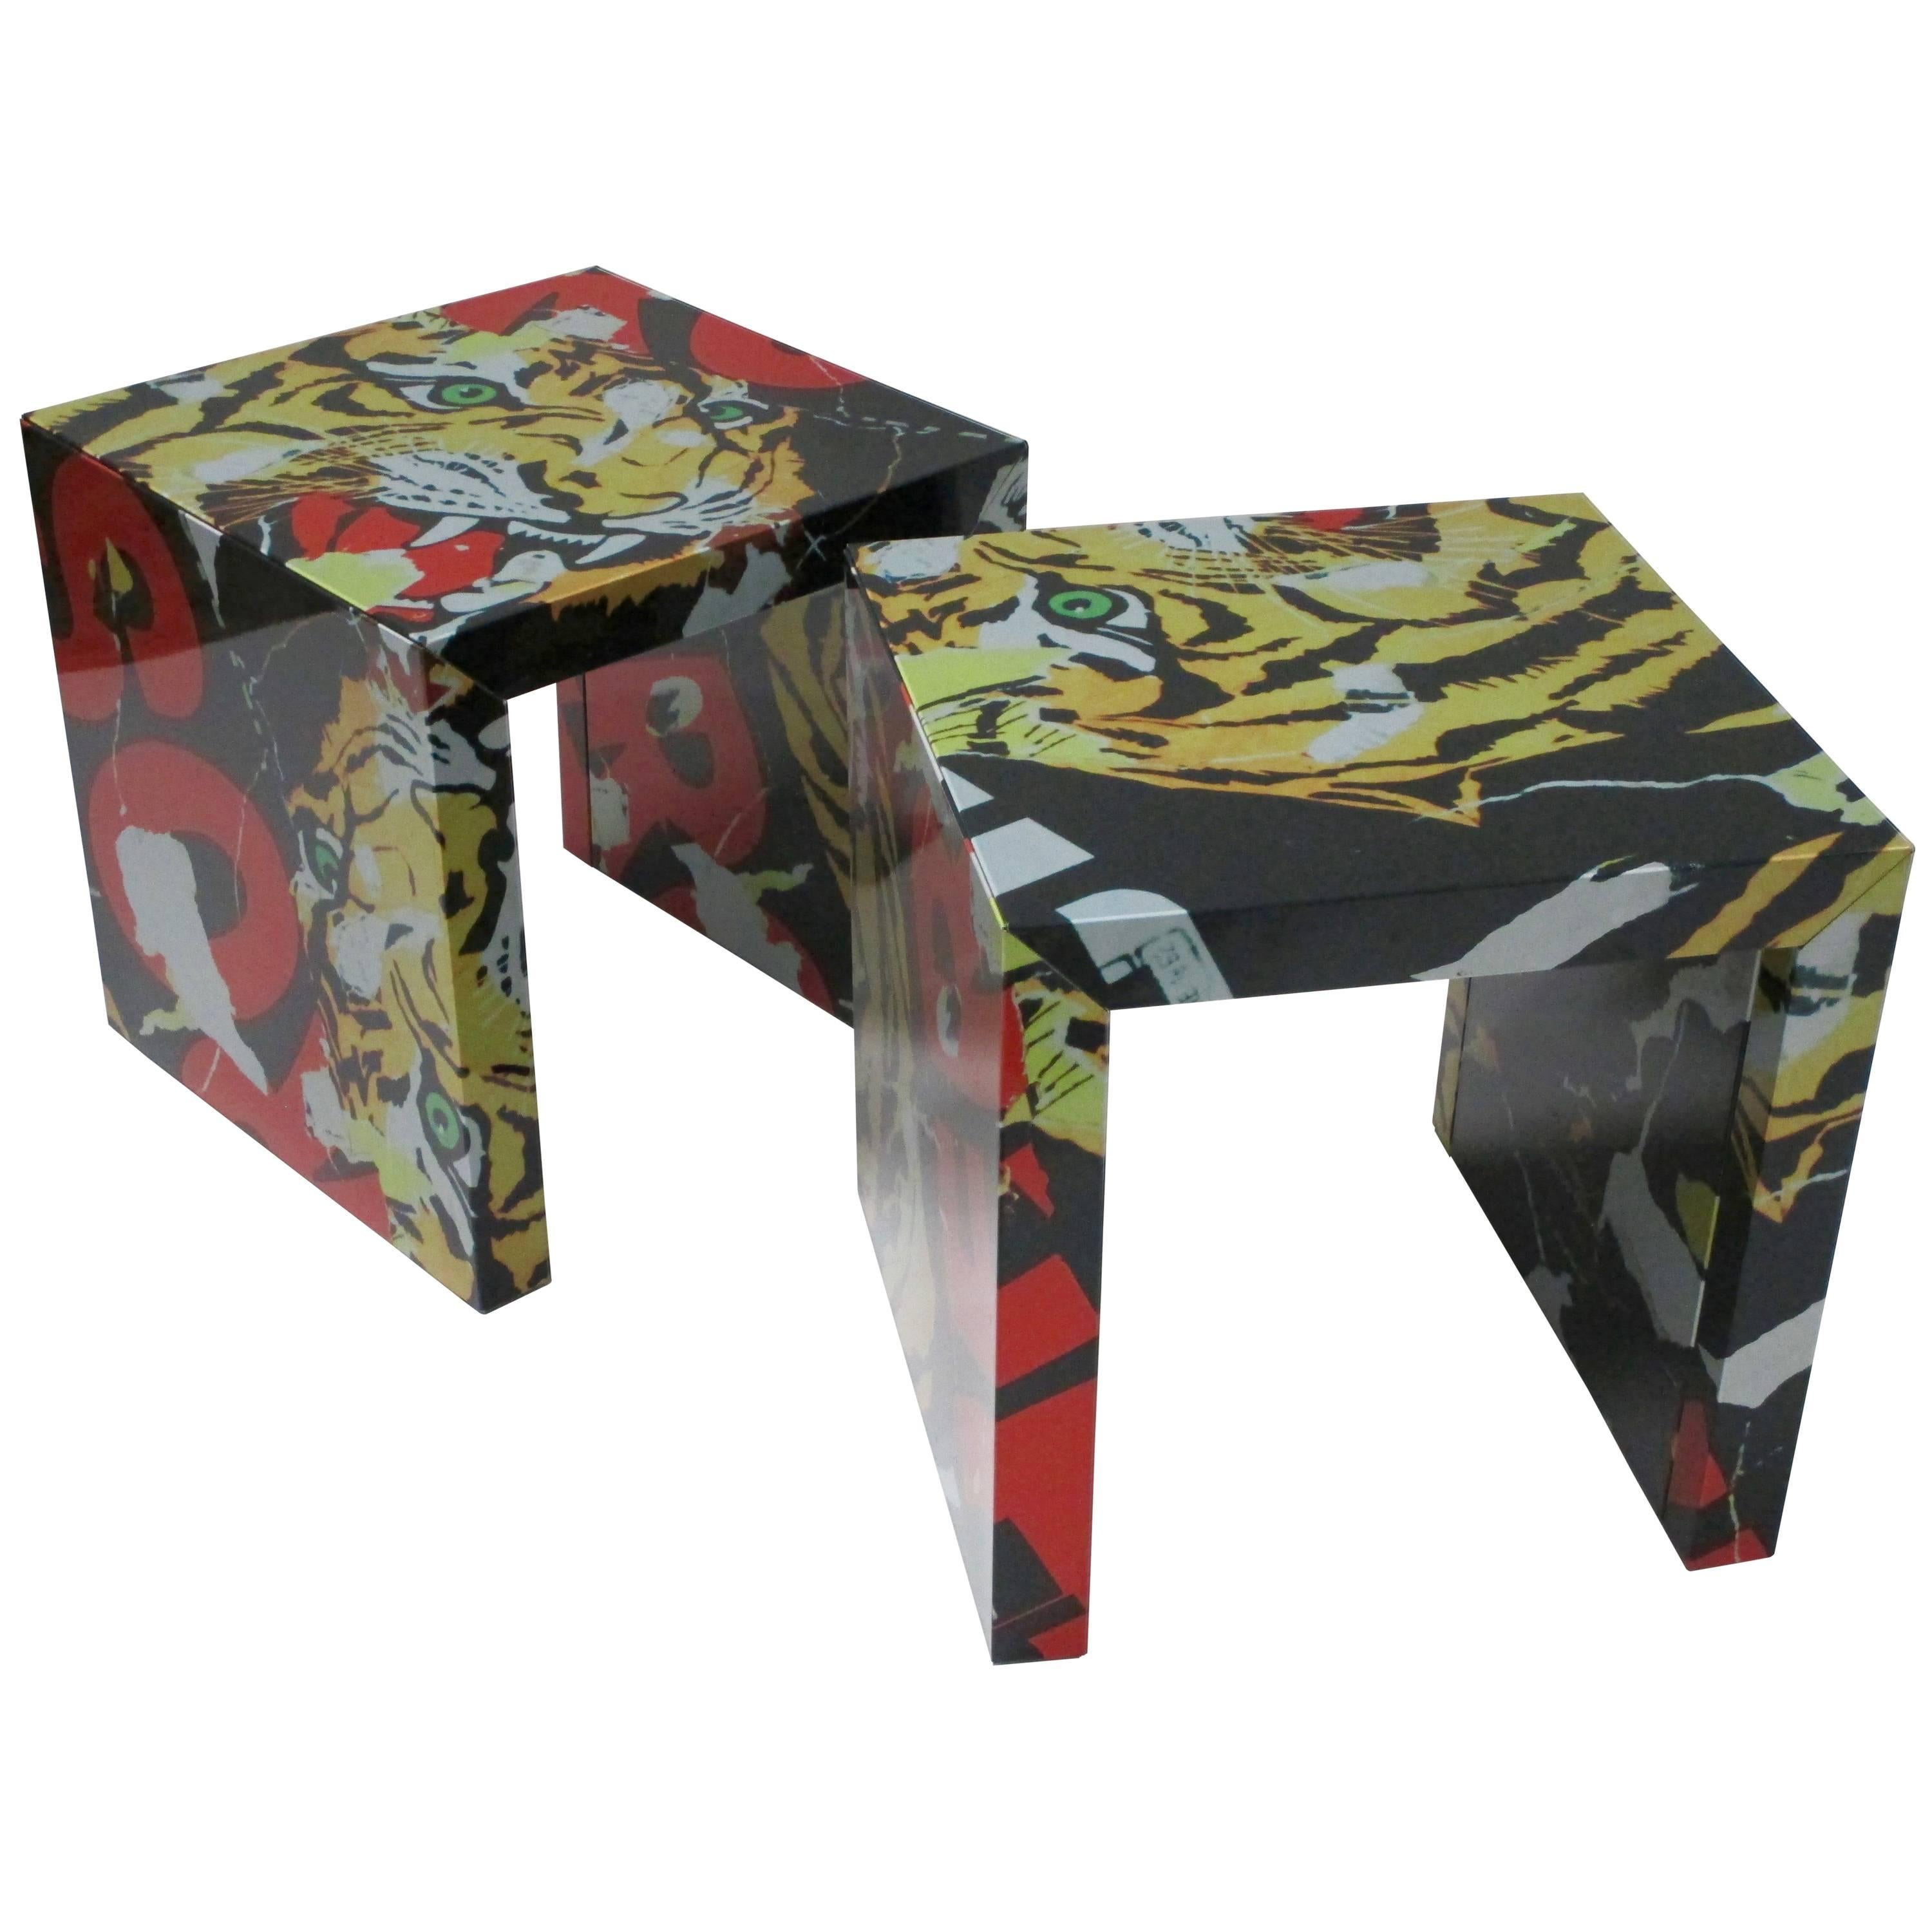 Pair of "Decollage" Metal Side Tables by Mimmo Rotella and Marco Ferreri For Sale